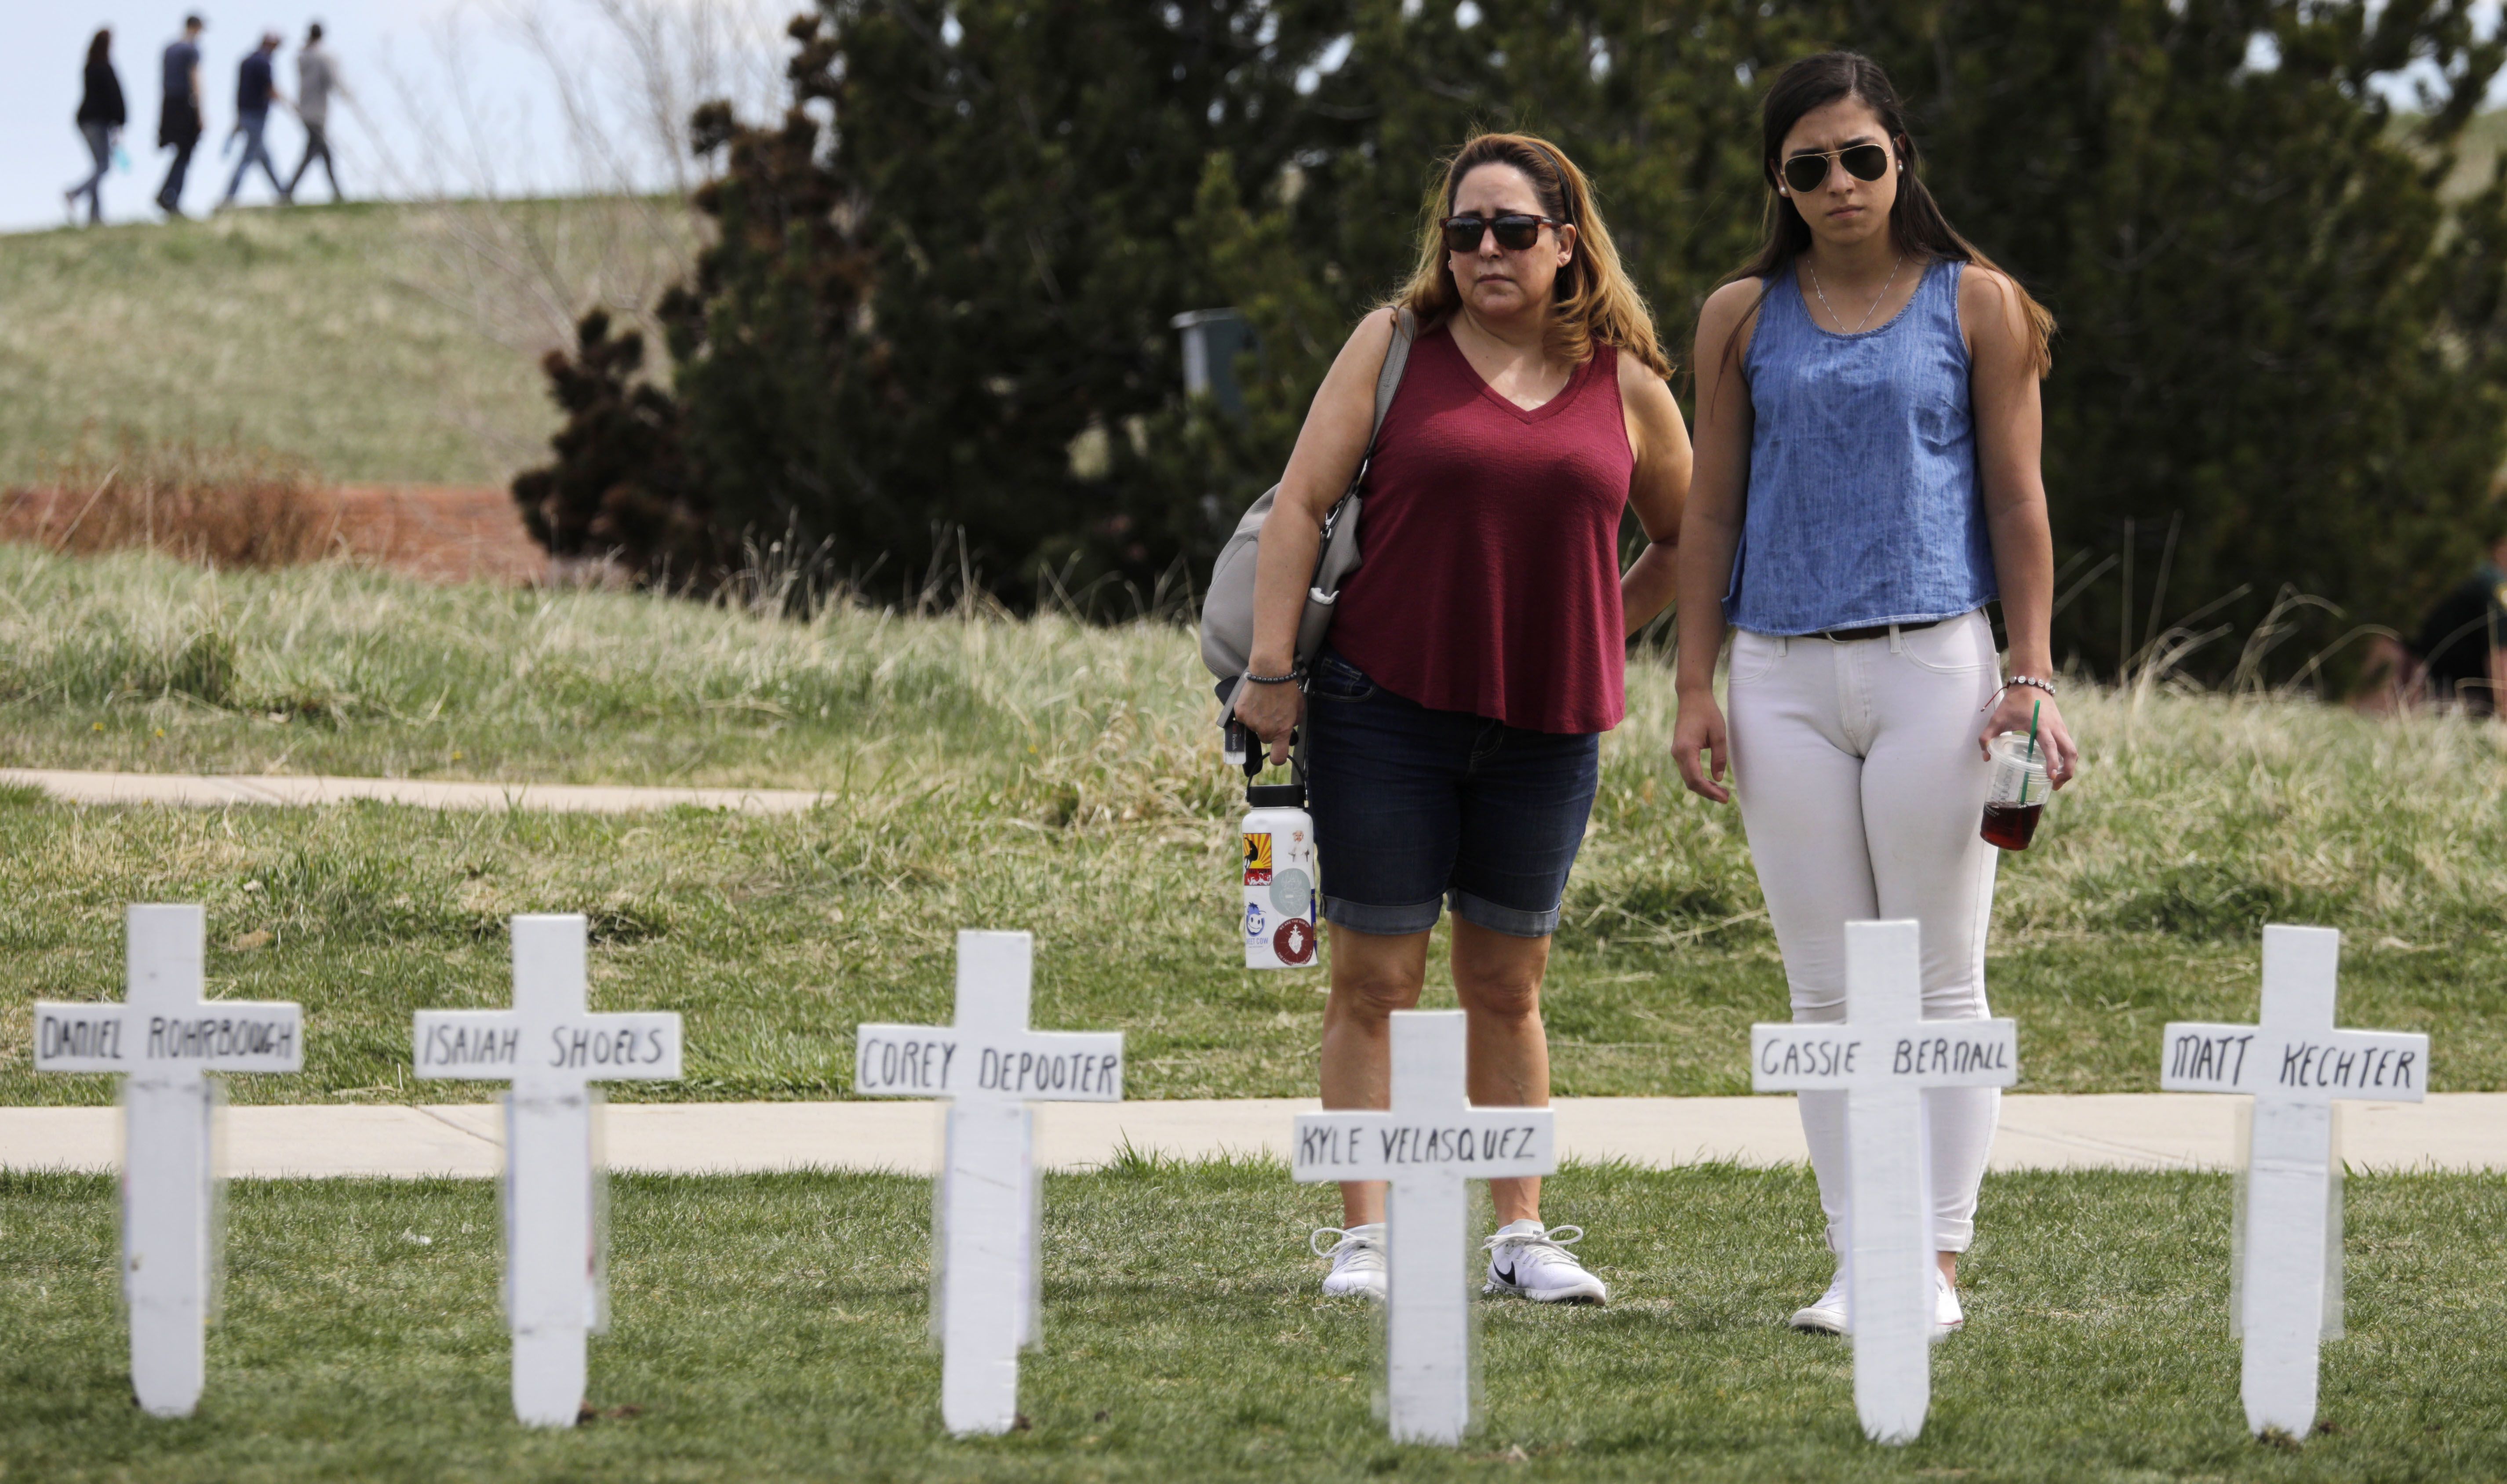  Michelle Aguayo of Morrison, Colorado and her daughter, Ciara Shannon, of Boulder, Colorado, stop by an ad hoc display of crosses with the names of students killed in the 1999 attack.